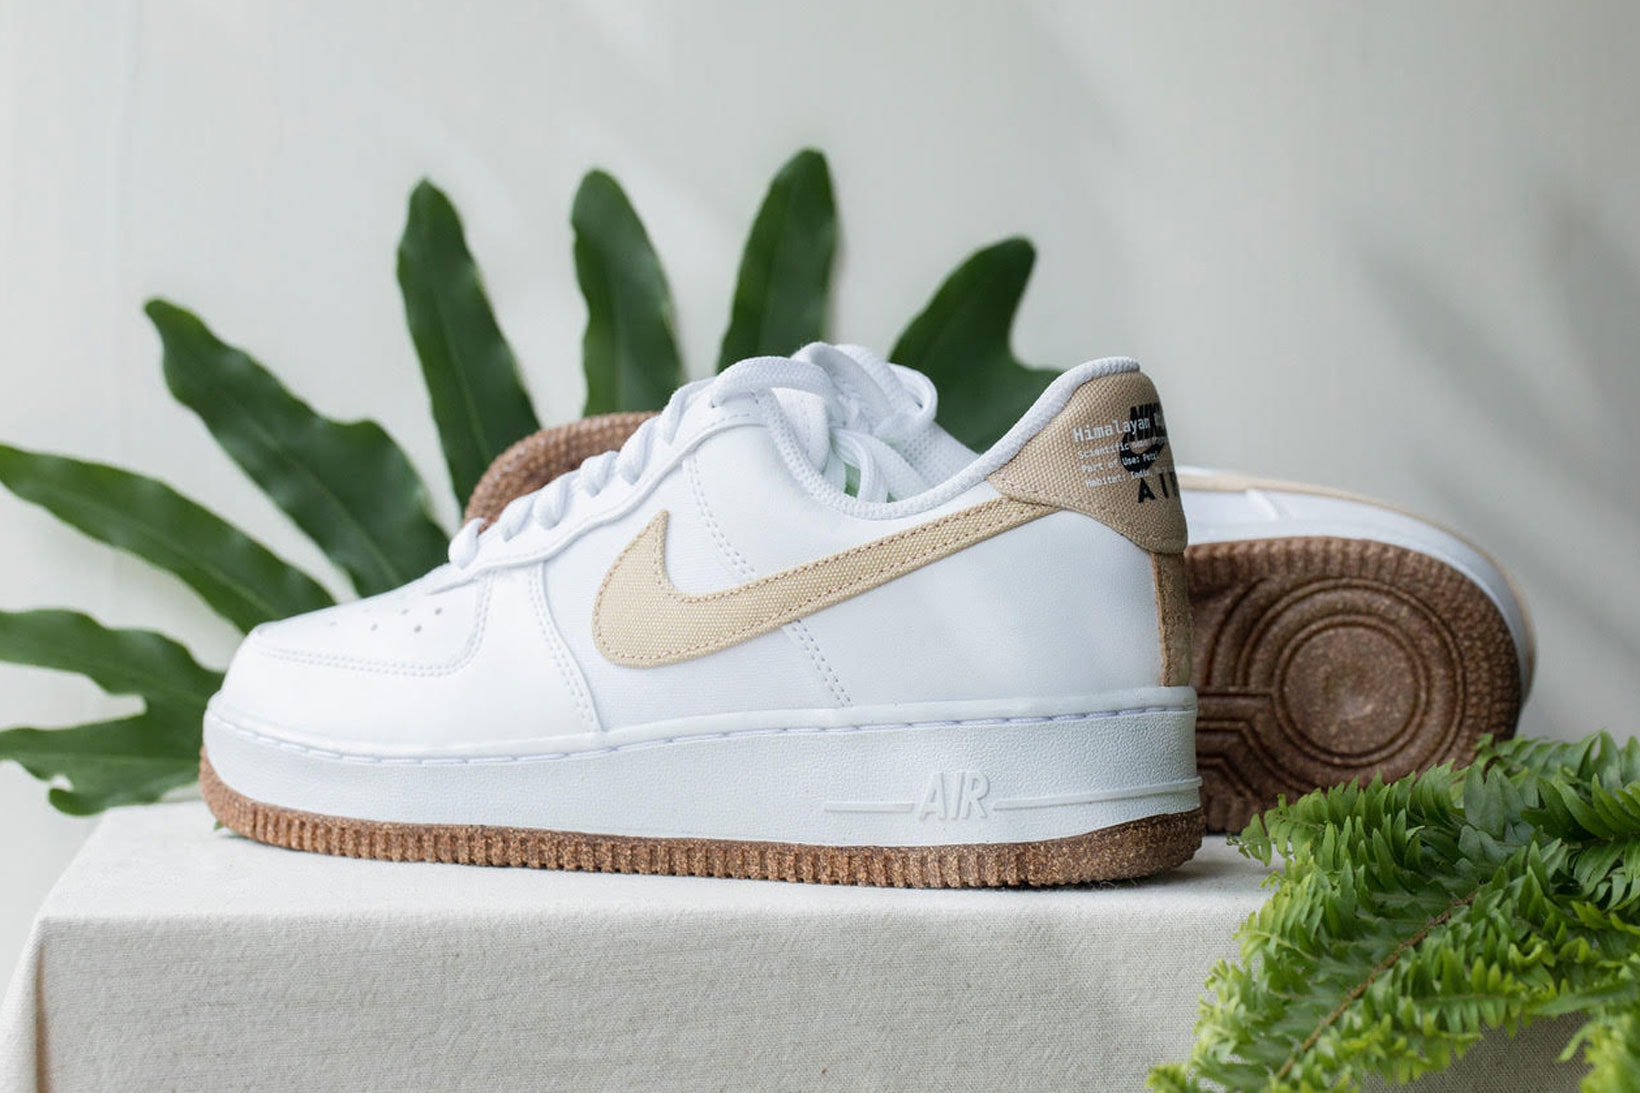 nike air force 1 af1 himalayan rhubarb plant dye sustainable sneakers laterals details cork heel